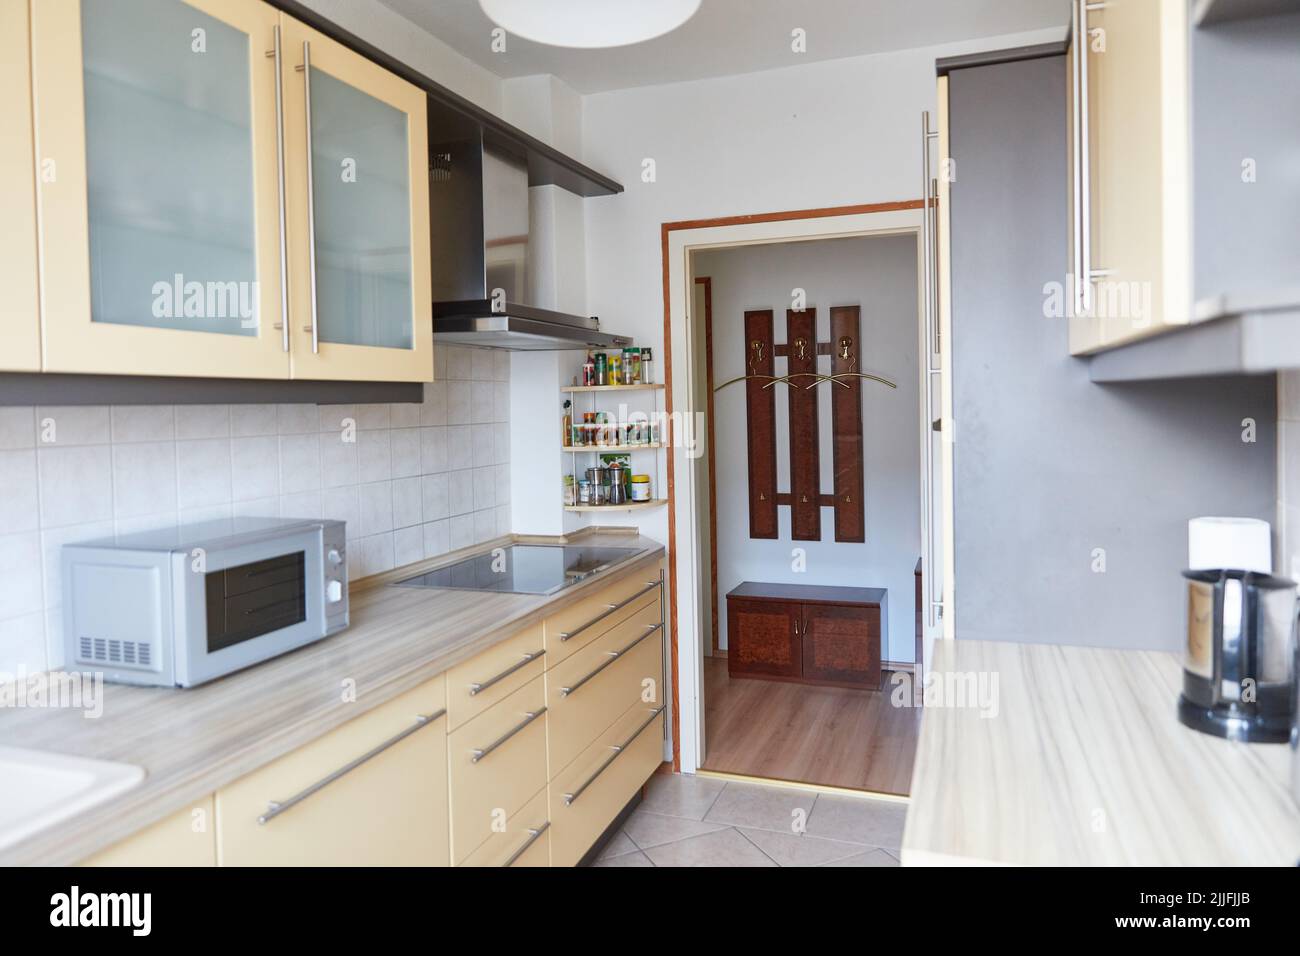 Tidy, small, clean kitchen in a rental apartment Stock Photo